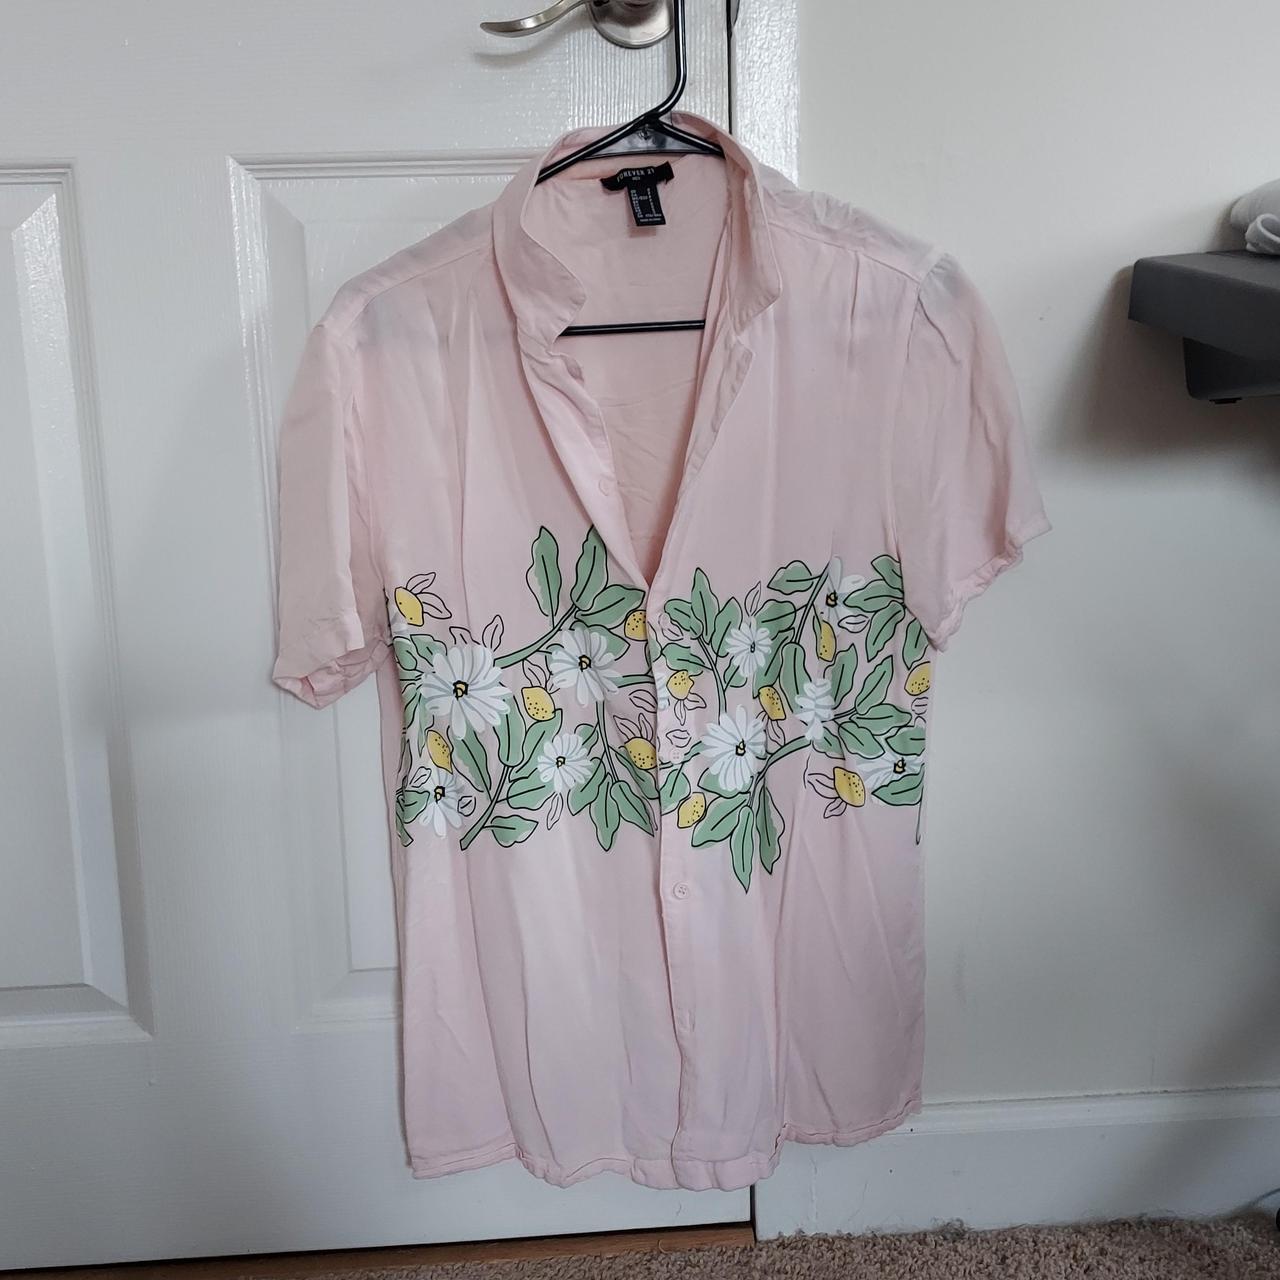 Forever New Men's Pink and Green Shirt